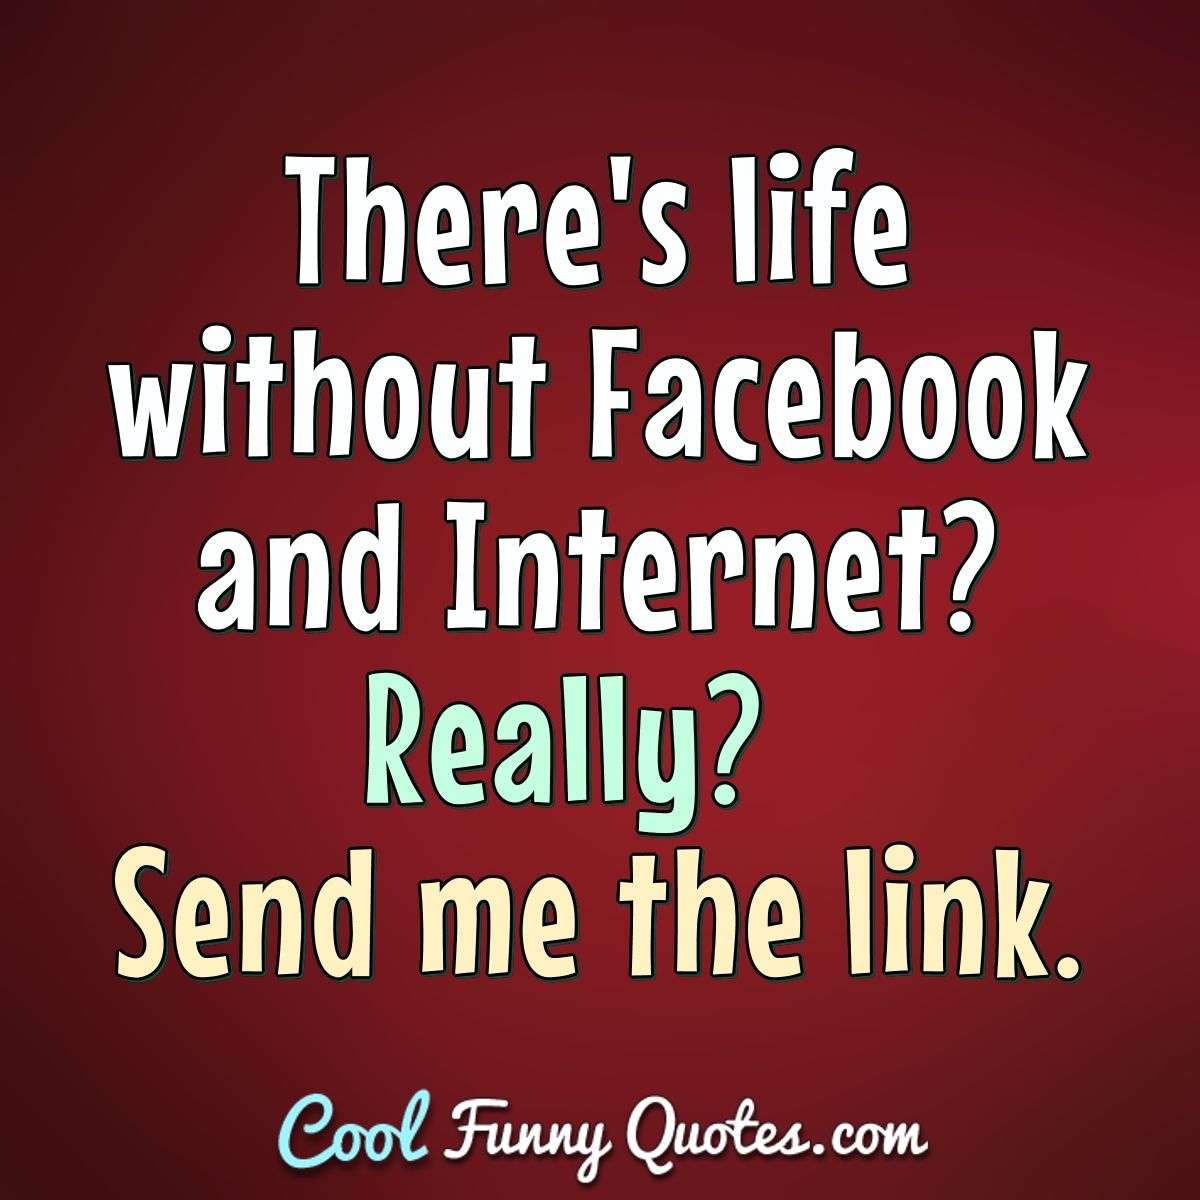 There's life without Facebook and Internet? Really?  Send me the link. - Anonymous